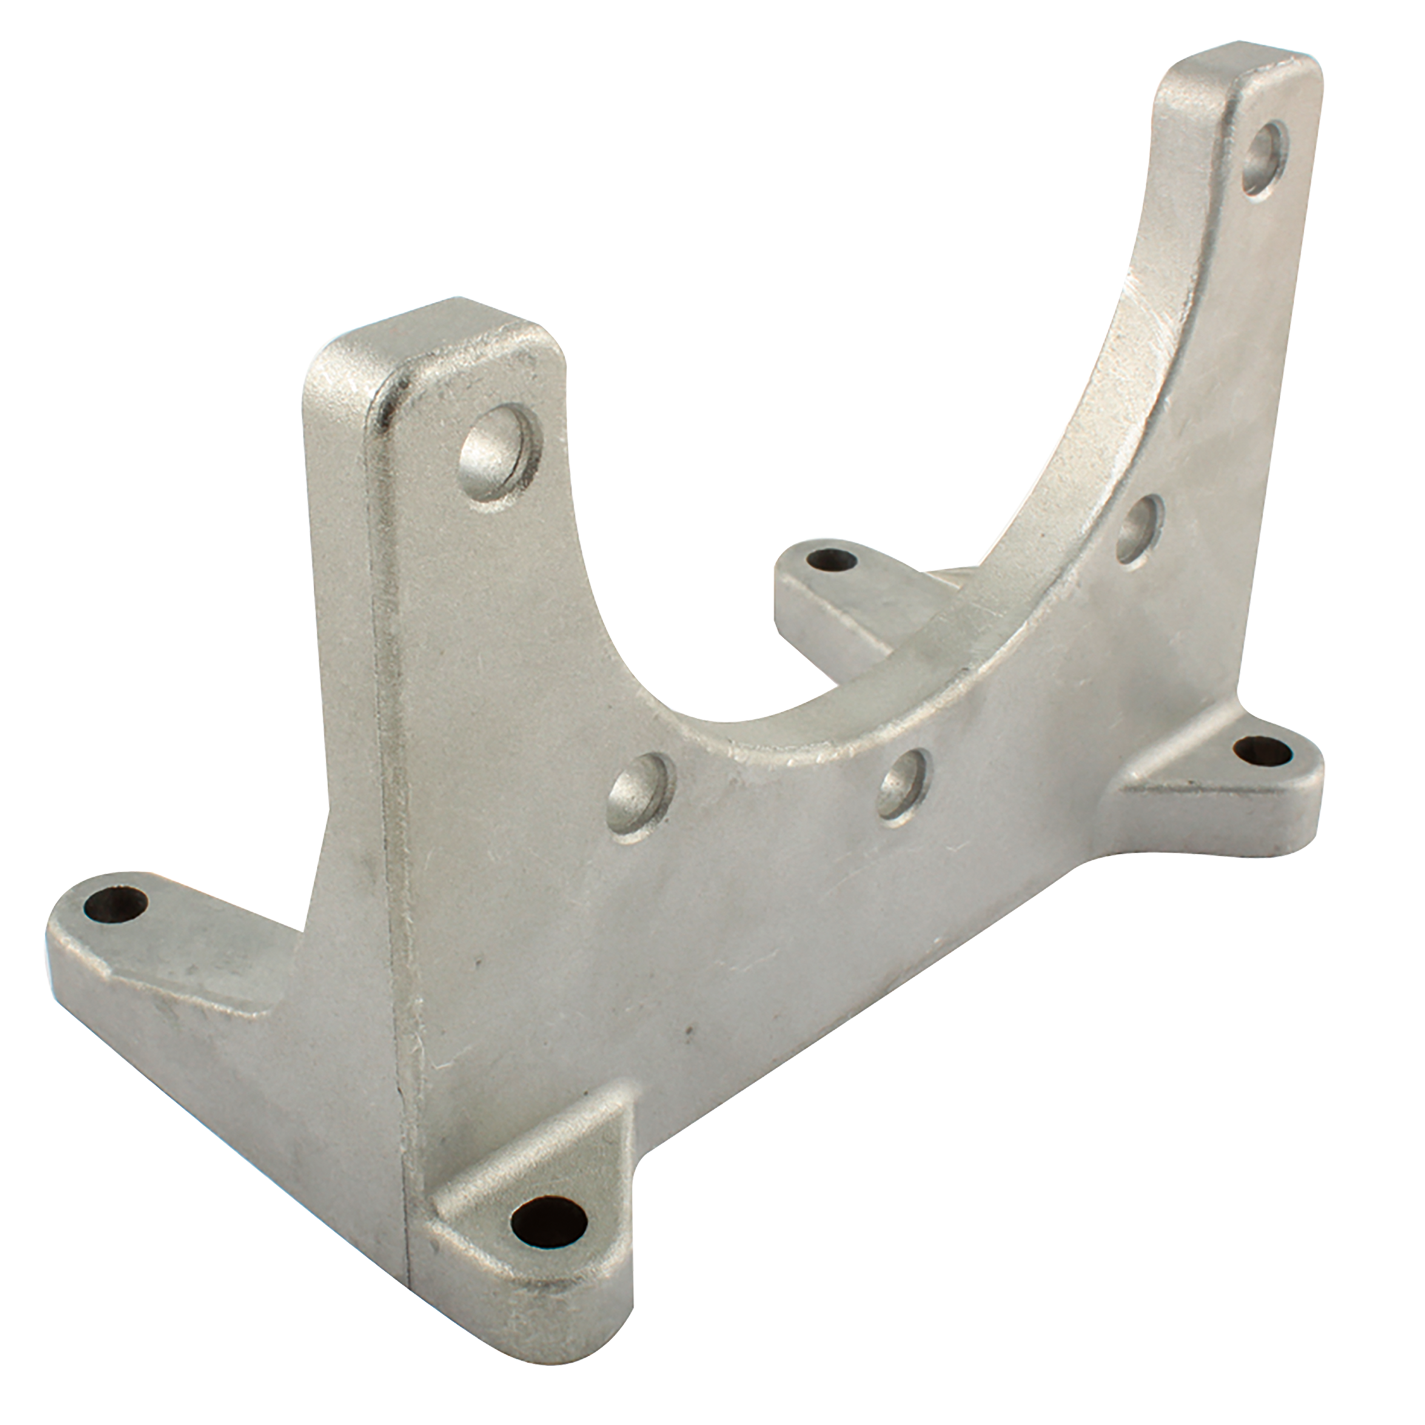 FOOT MOUNTING FRAME SIZE 100/112